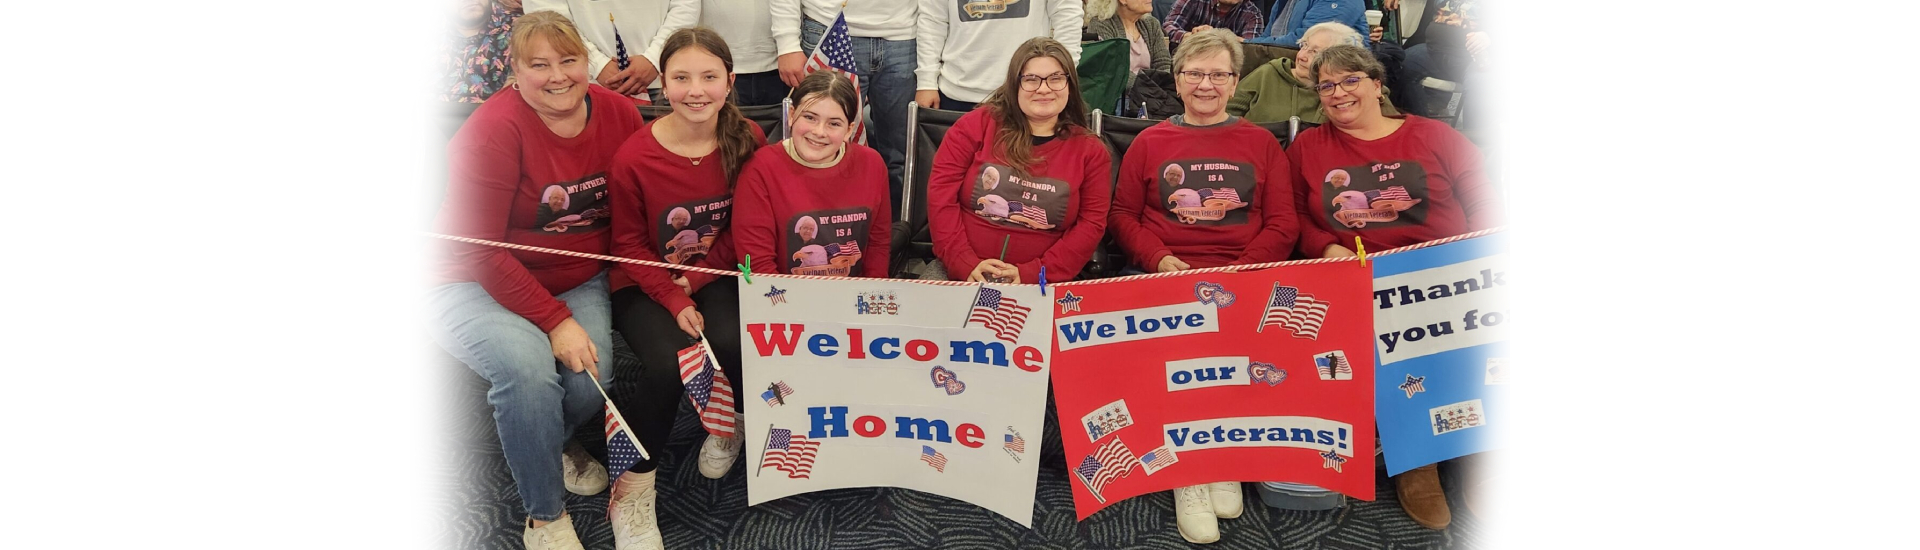 Family holds signs for their veteran